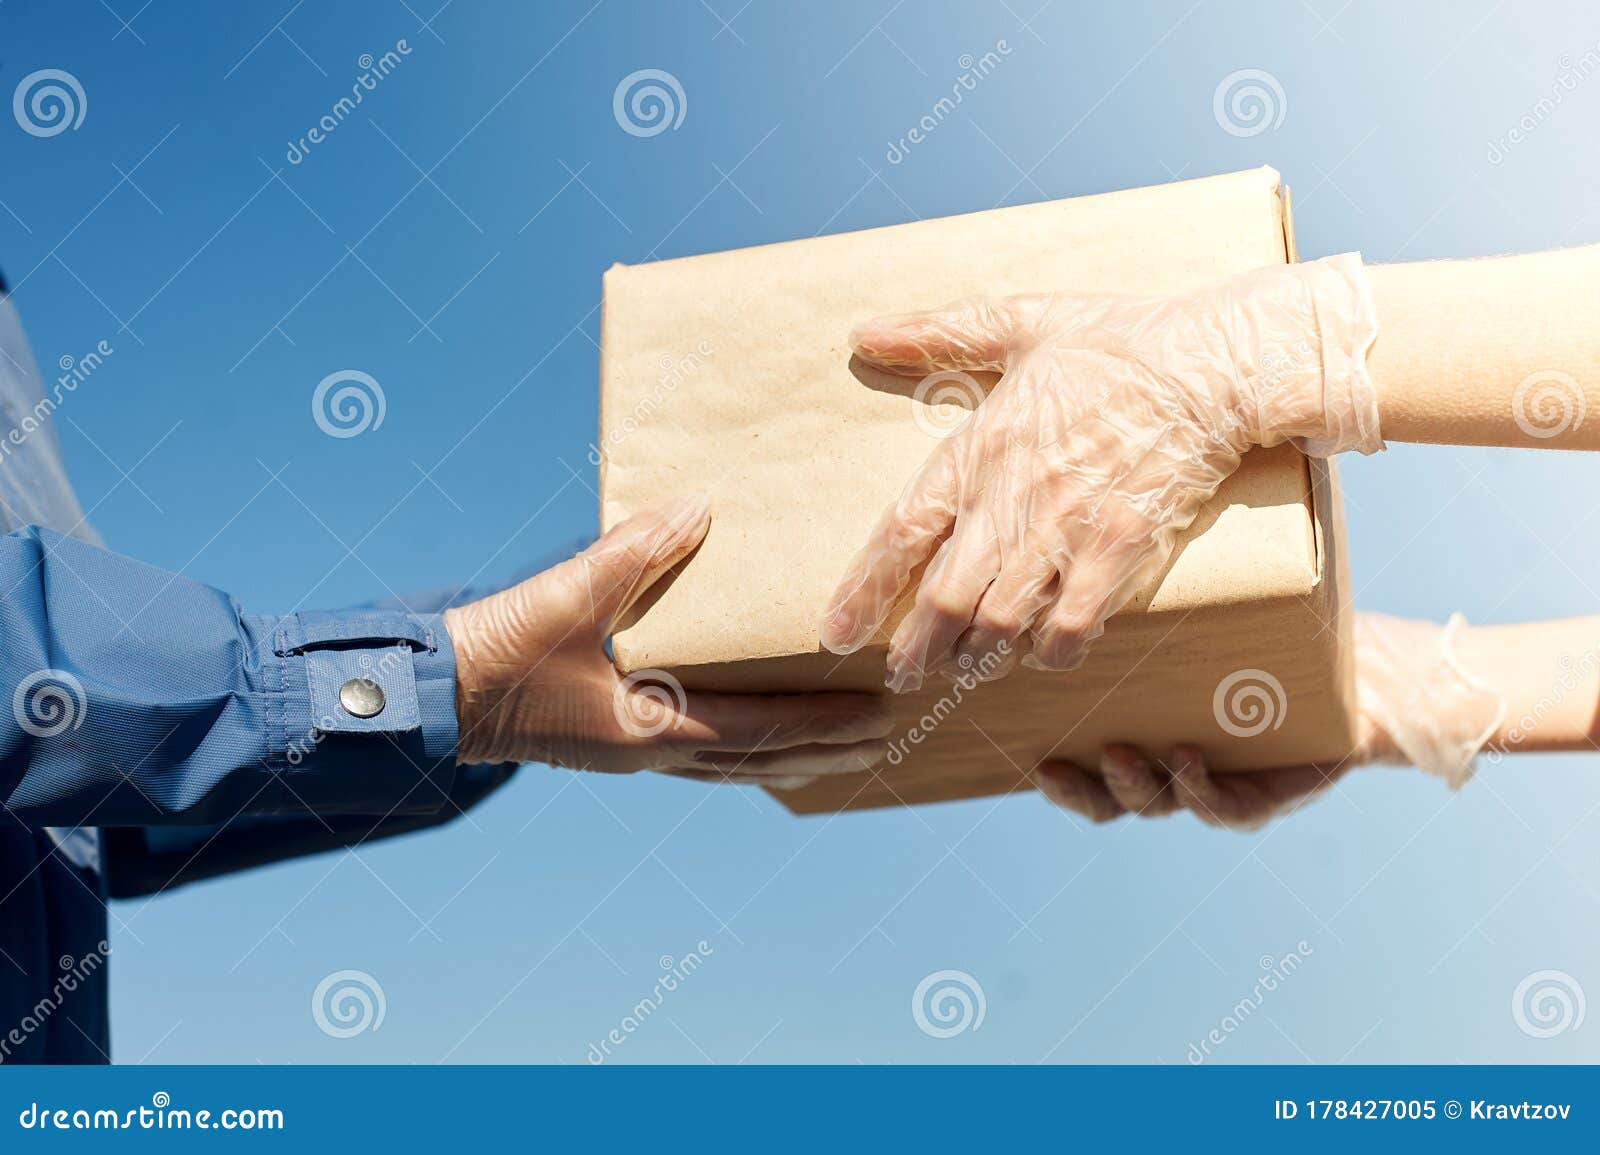 https://thumbs.dreamstime.com/z/deliveryman-rubber-gloves-gives-package-to-customer-delivery-service-quarantine-effect-covid-deliveryman-178427005.jpg